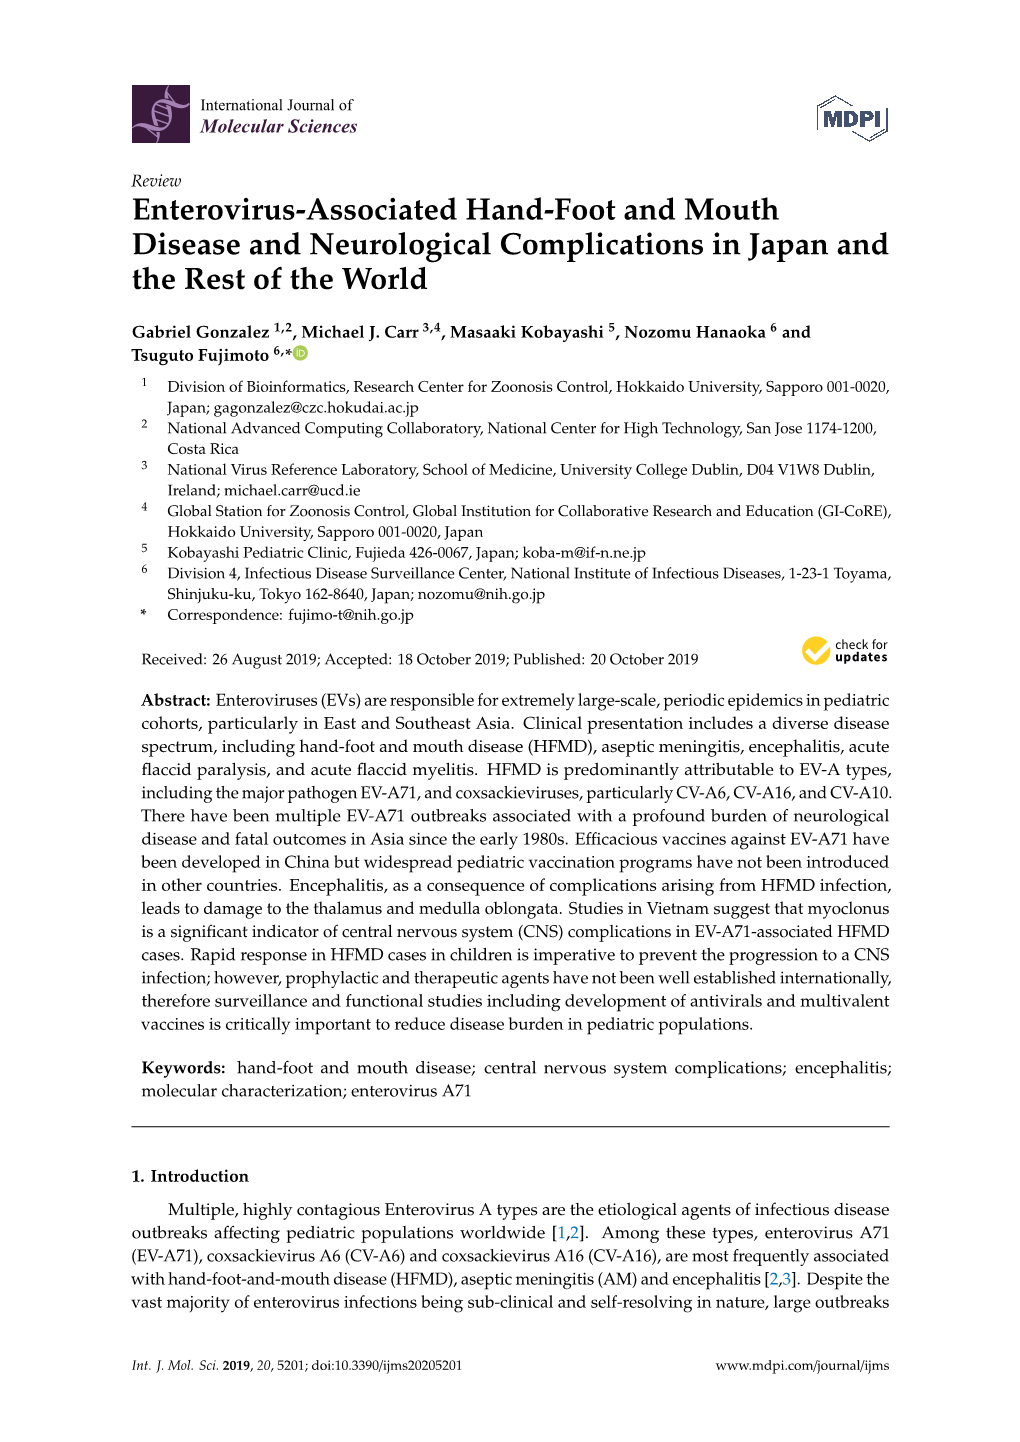 Enterovirus-Associated Hand-Foot and Mouth Disease and Neurological Complications in Japan and the Rest of the World